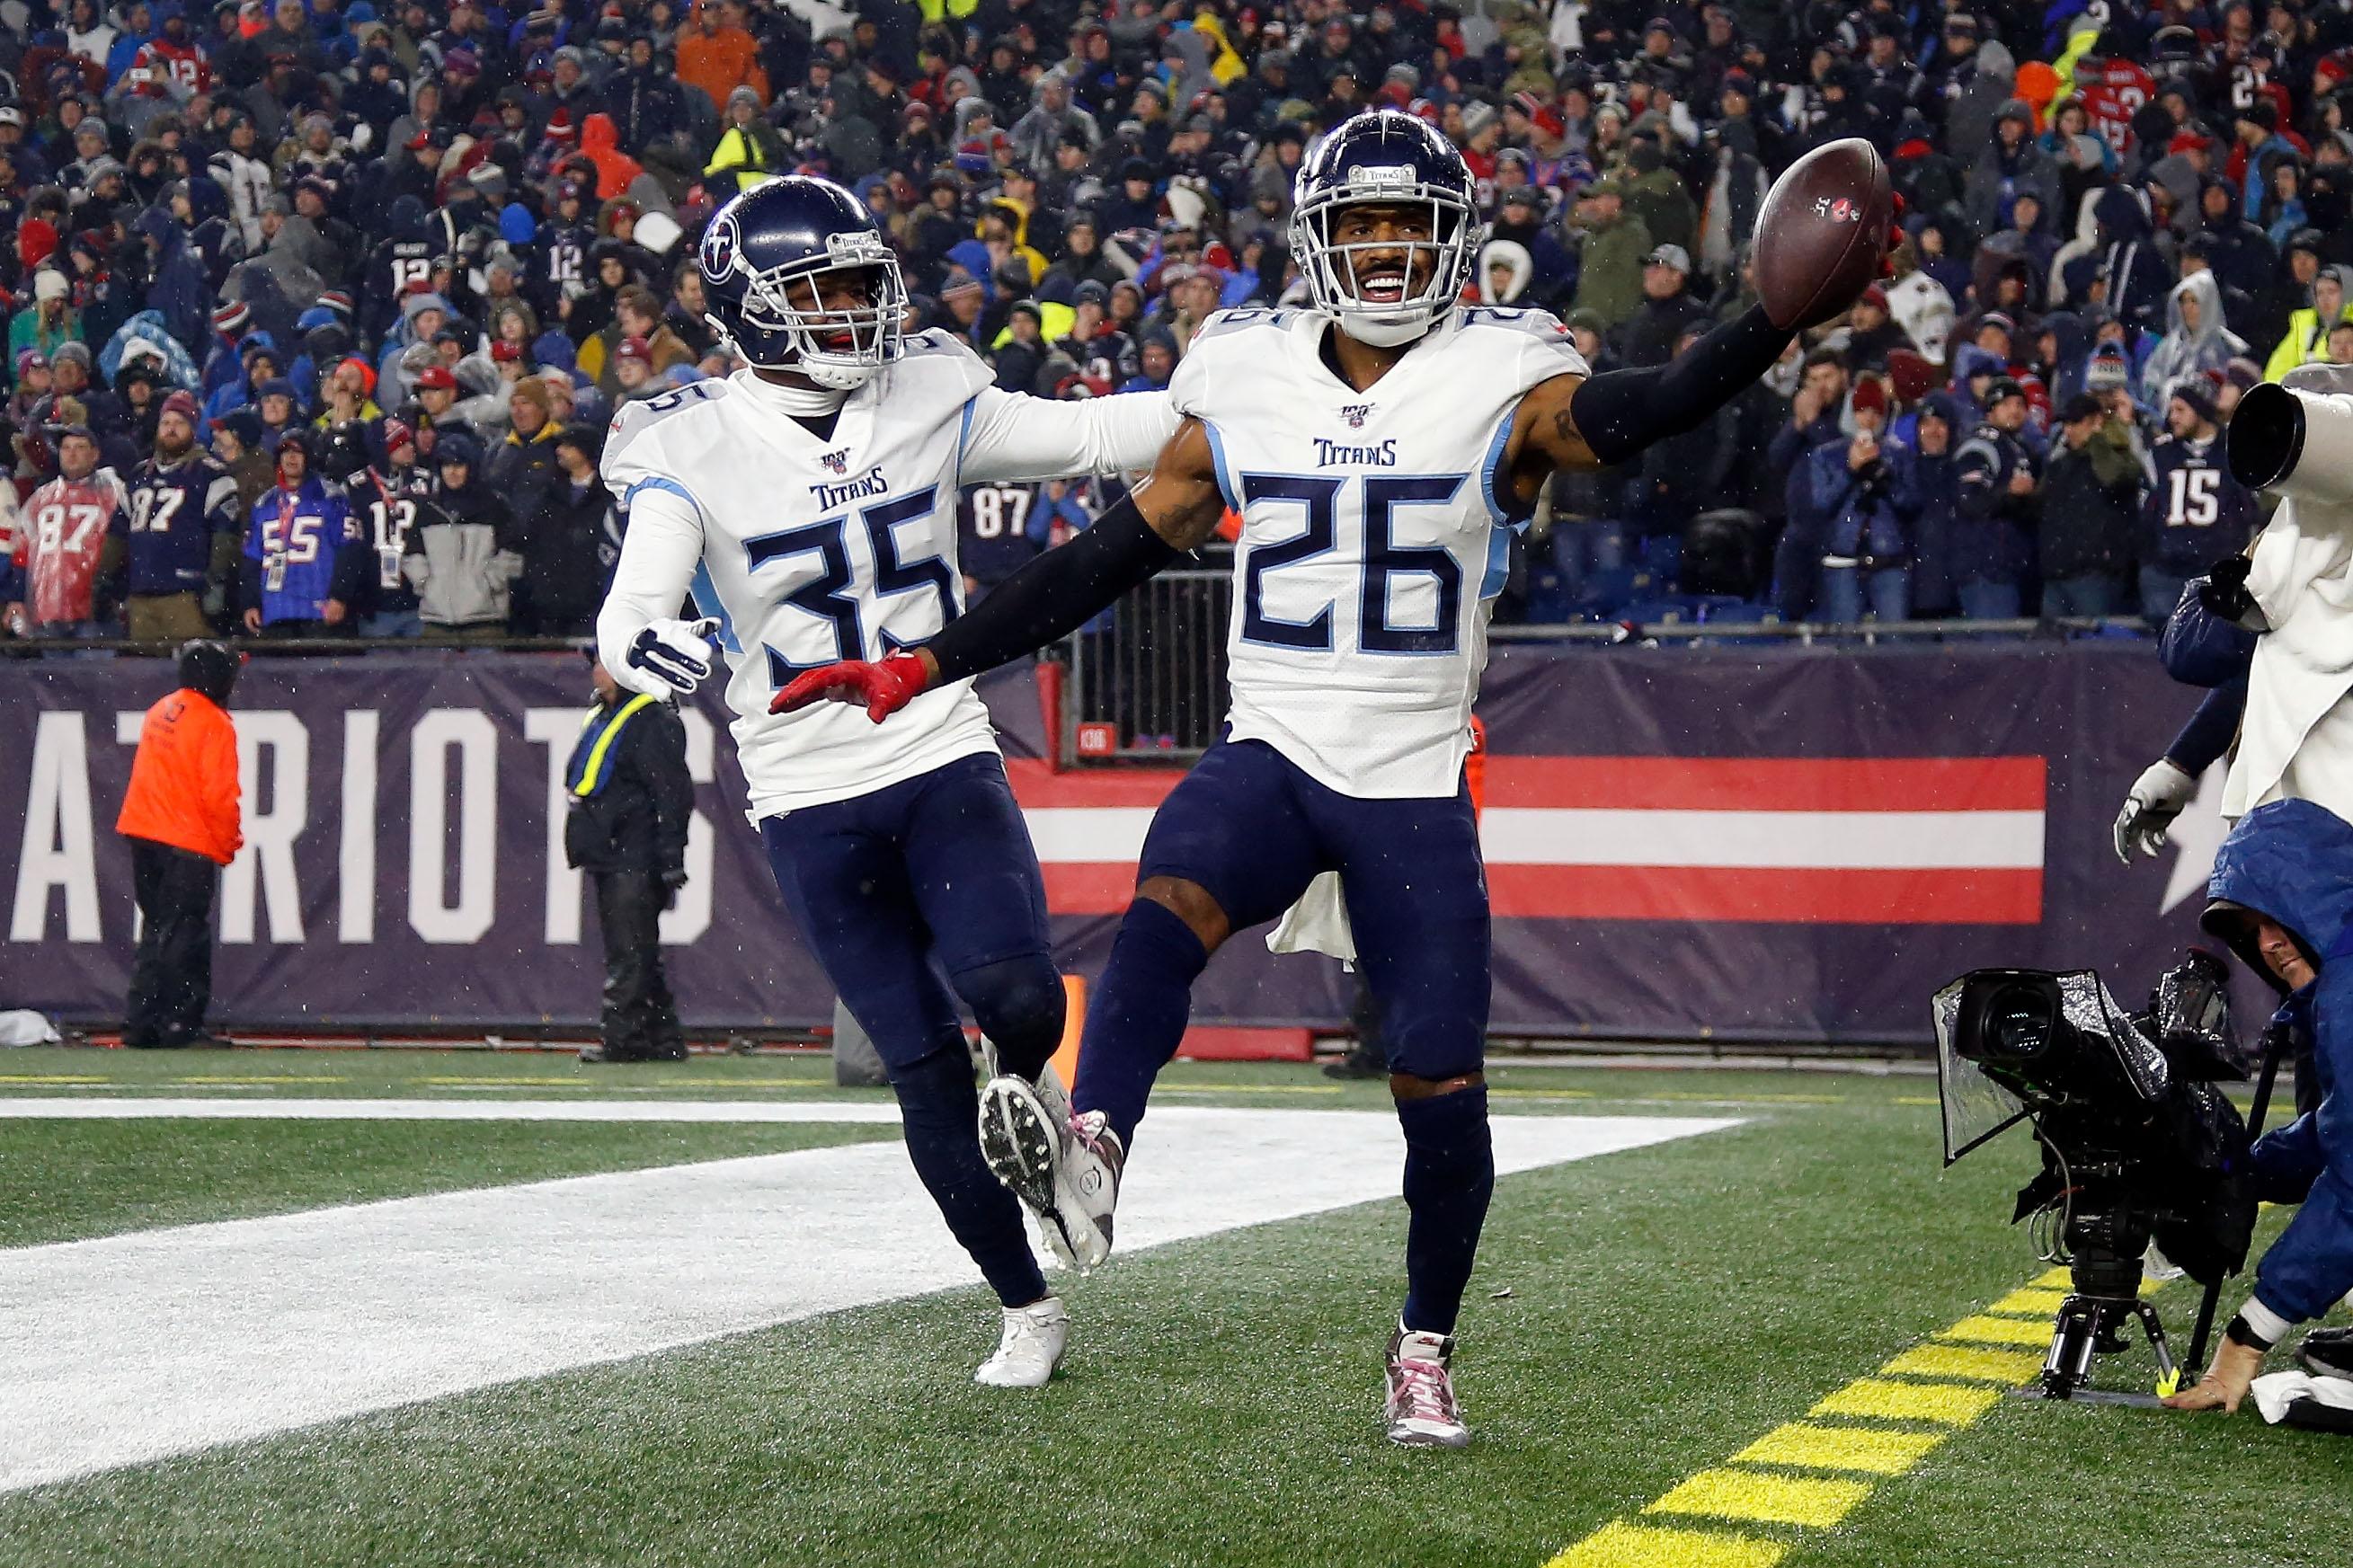 Jan 4, 2020; Foxborough, Massachusetts, USA; Tennessee Titans cornerback Logan Ryan (26) celebrates with defensive back Tramaine Brock (35) after scoring a touchdown on an interception against the New England Patriots during the second half at Gillette Stadium. Mandatory Credit: Winslow Townson-USA TODAY Sports / © Winslow Townson-USA TODAY Sports